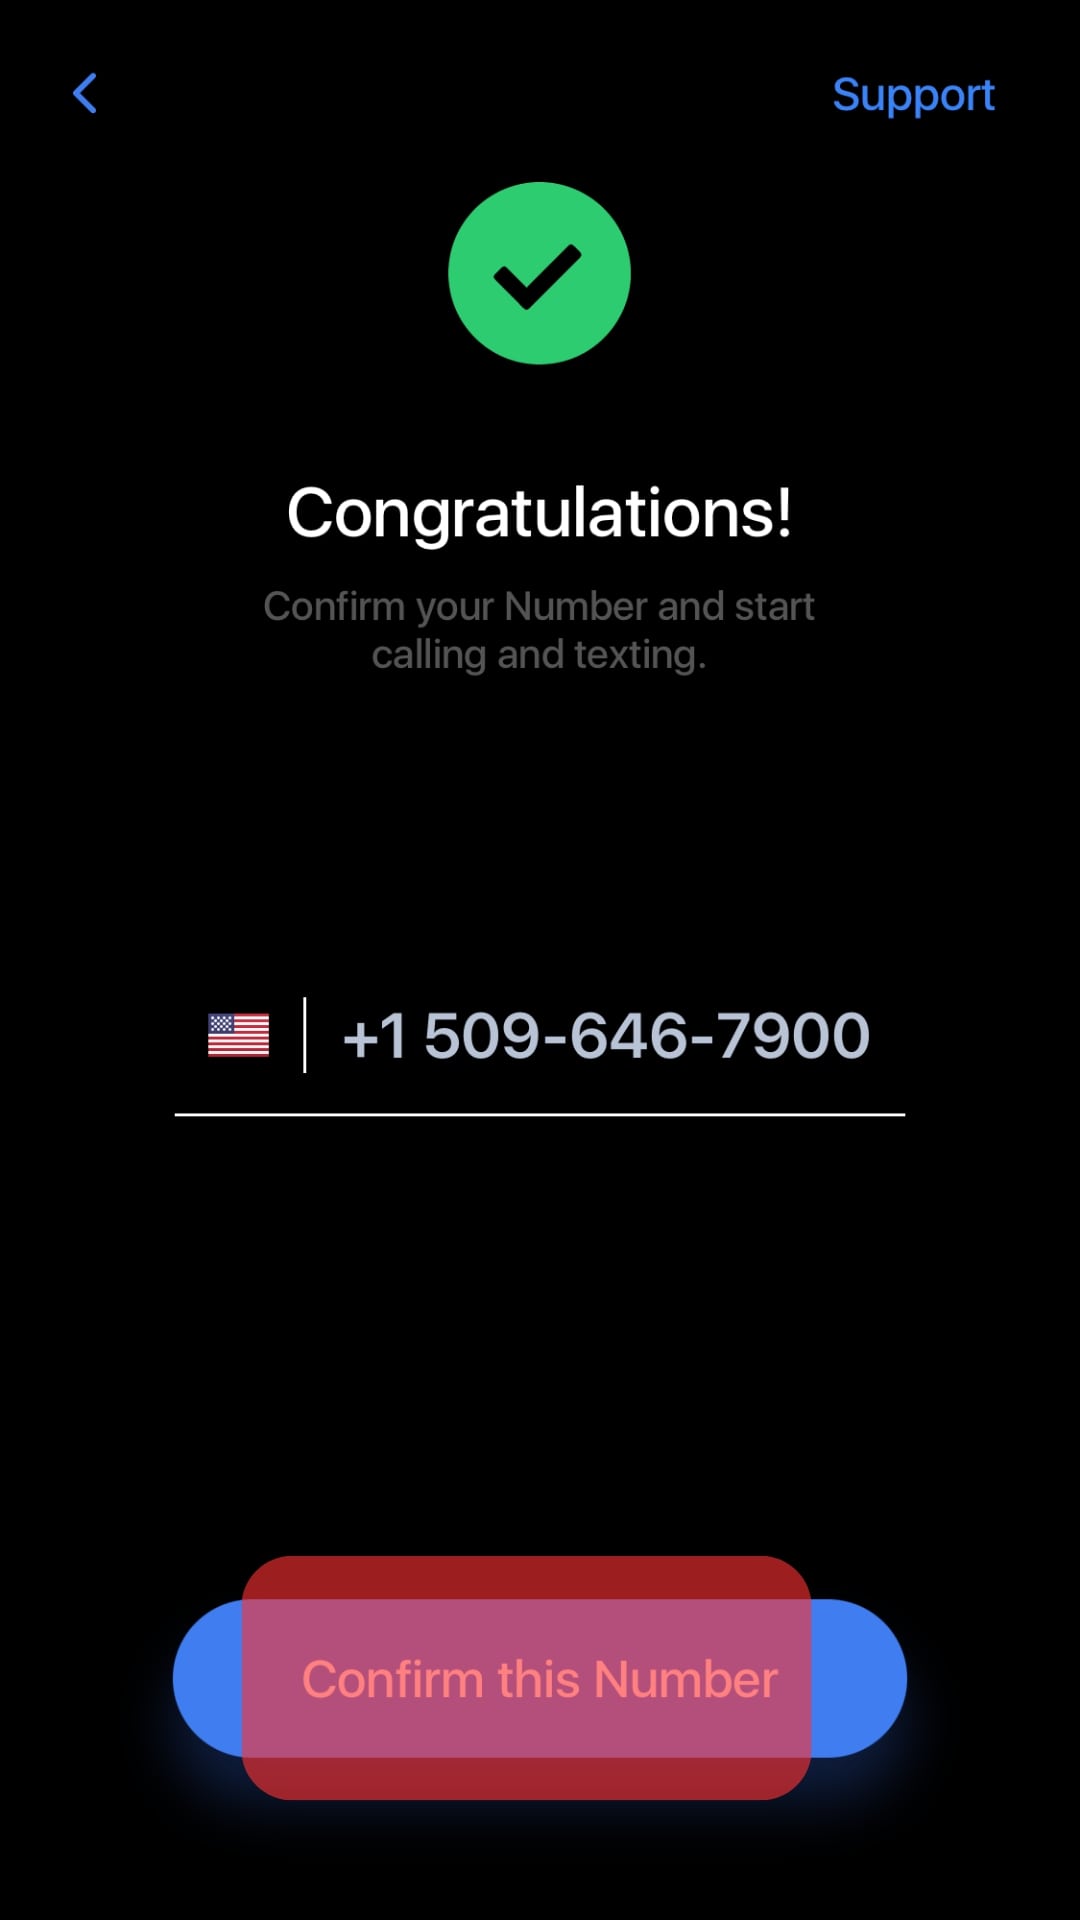 Tap On Confirm This Number.